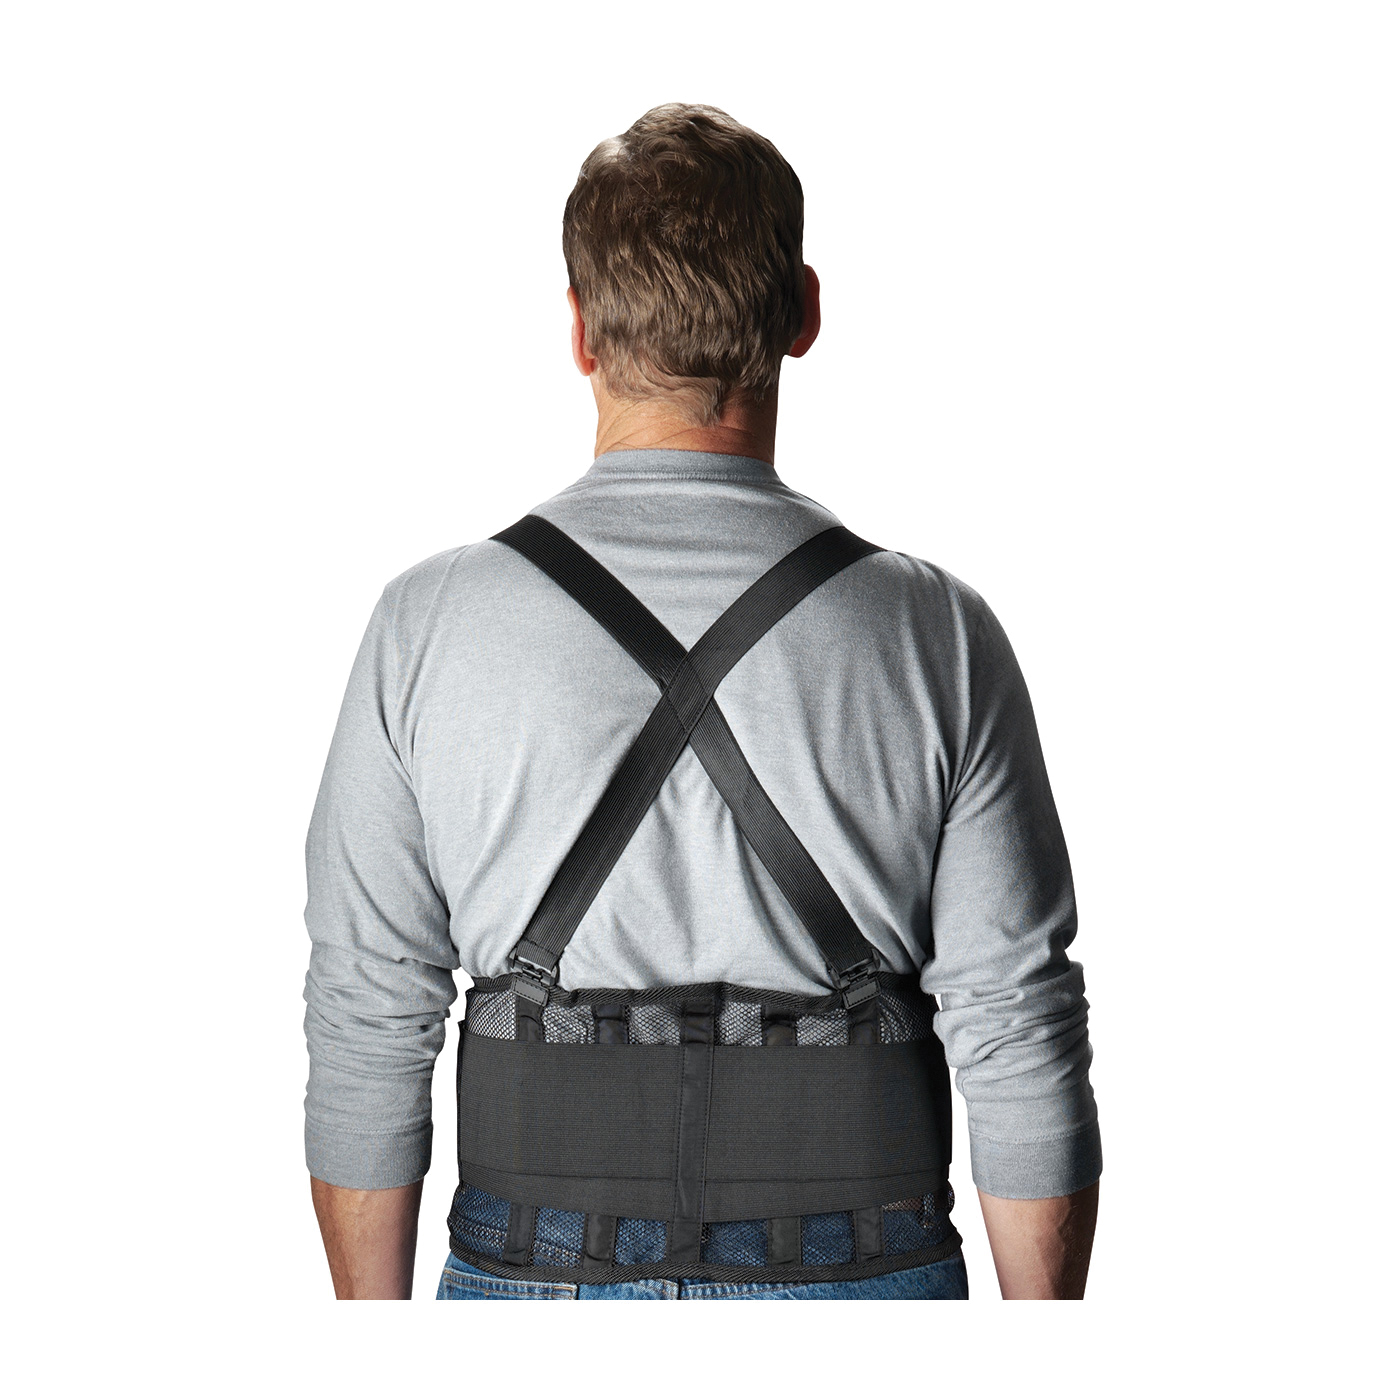 PIP® 290-440XXL Ergonomic Back Support Belt, 2XL, 48 to 54 in Fits Waist, 9 in W, Nylon Mesh, Black, Hook and Loop Closure